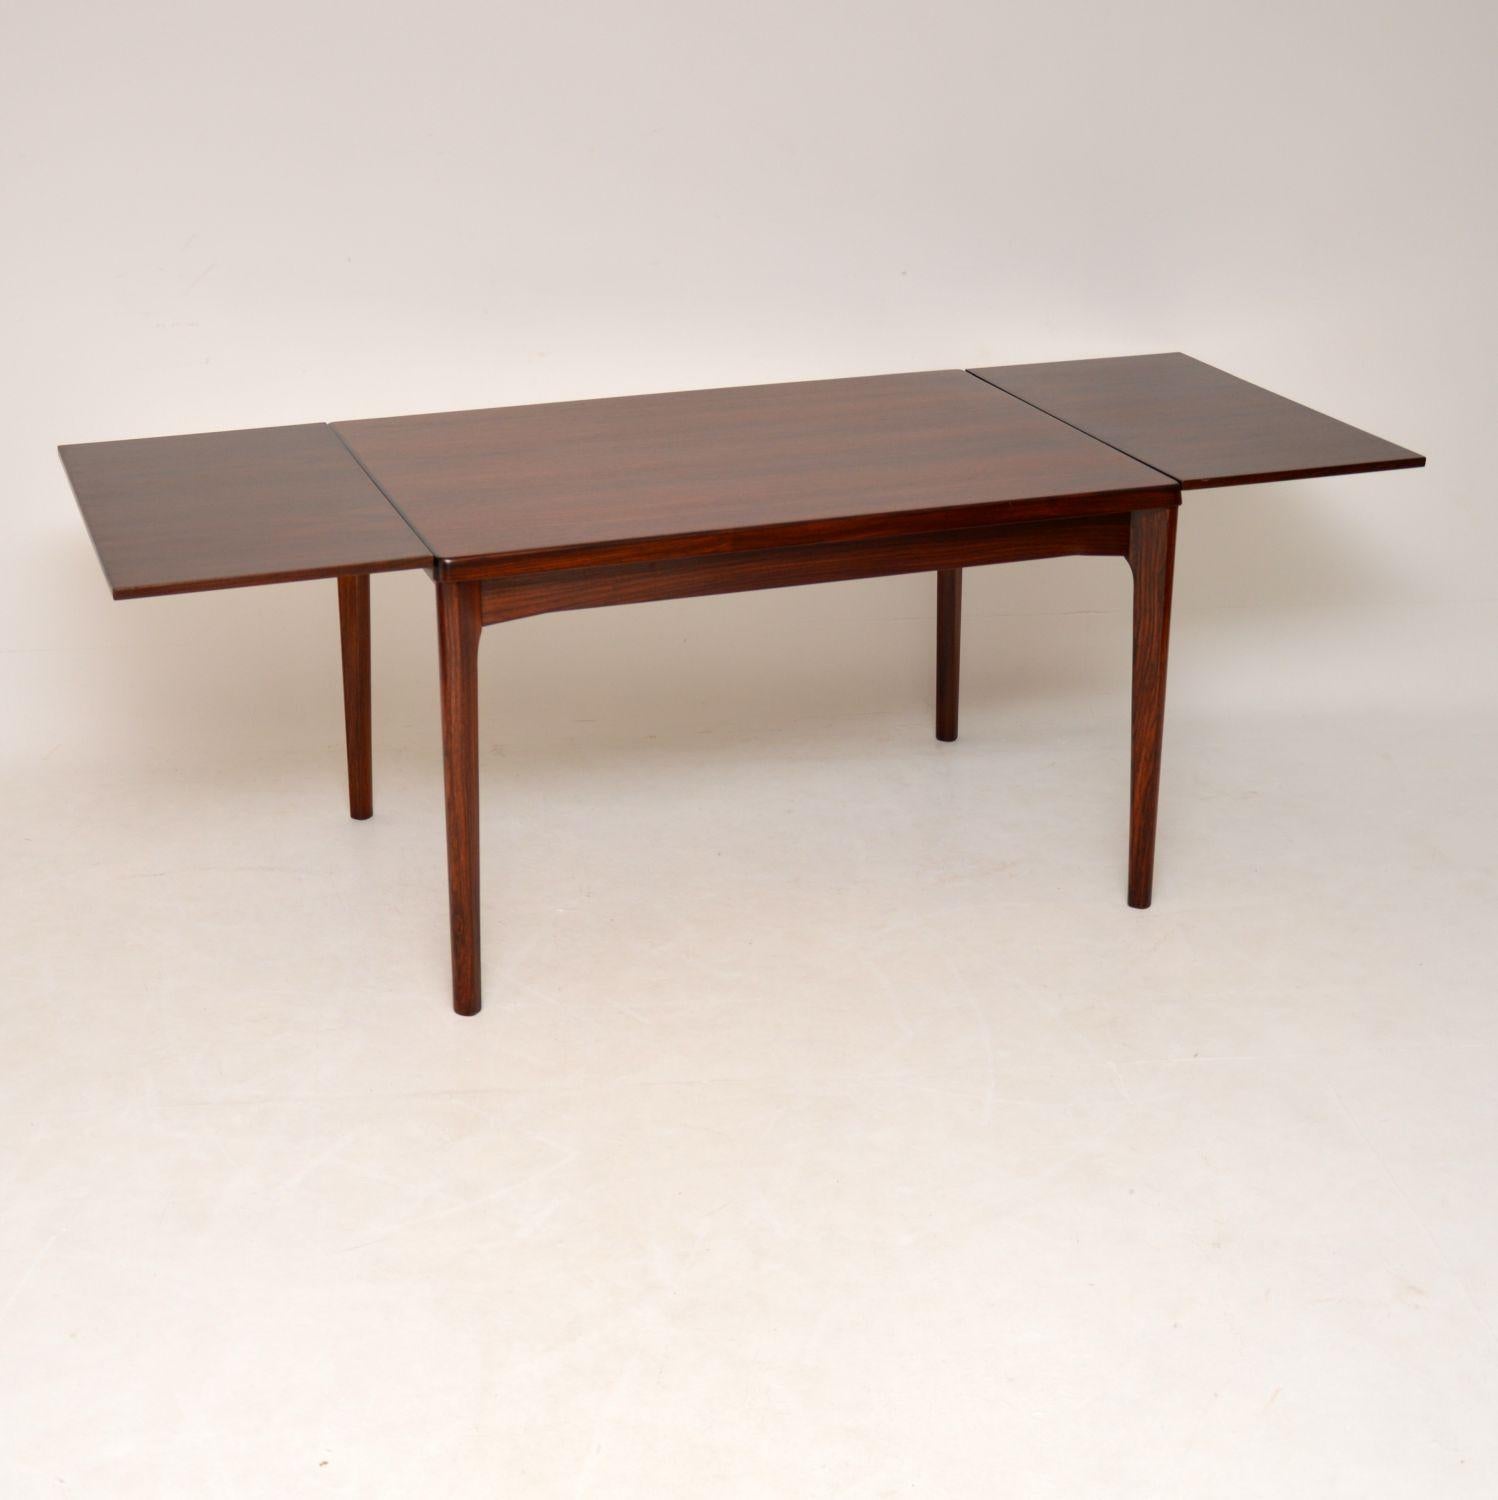 A beautifully made and very stylish Danish vintage dining table, this dates from the 1960s. It was made by Vejle Stolefabrik and was designed by Henning Kjaenulf. It’ has a clever design, the extending draw leaves on each side are beautifully